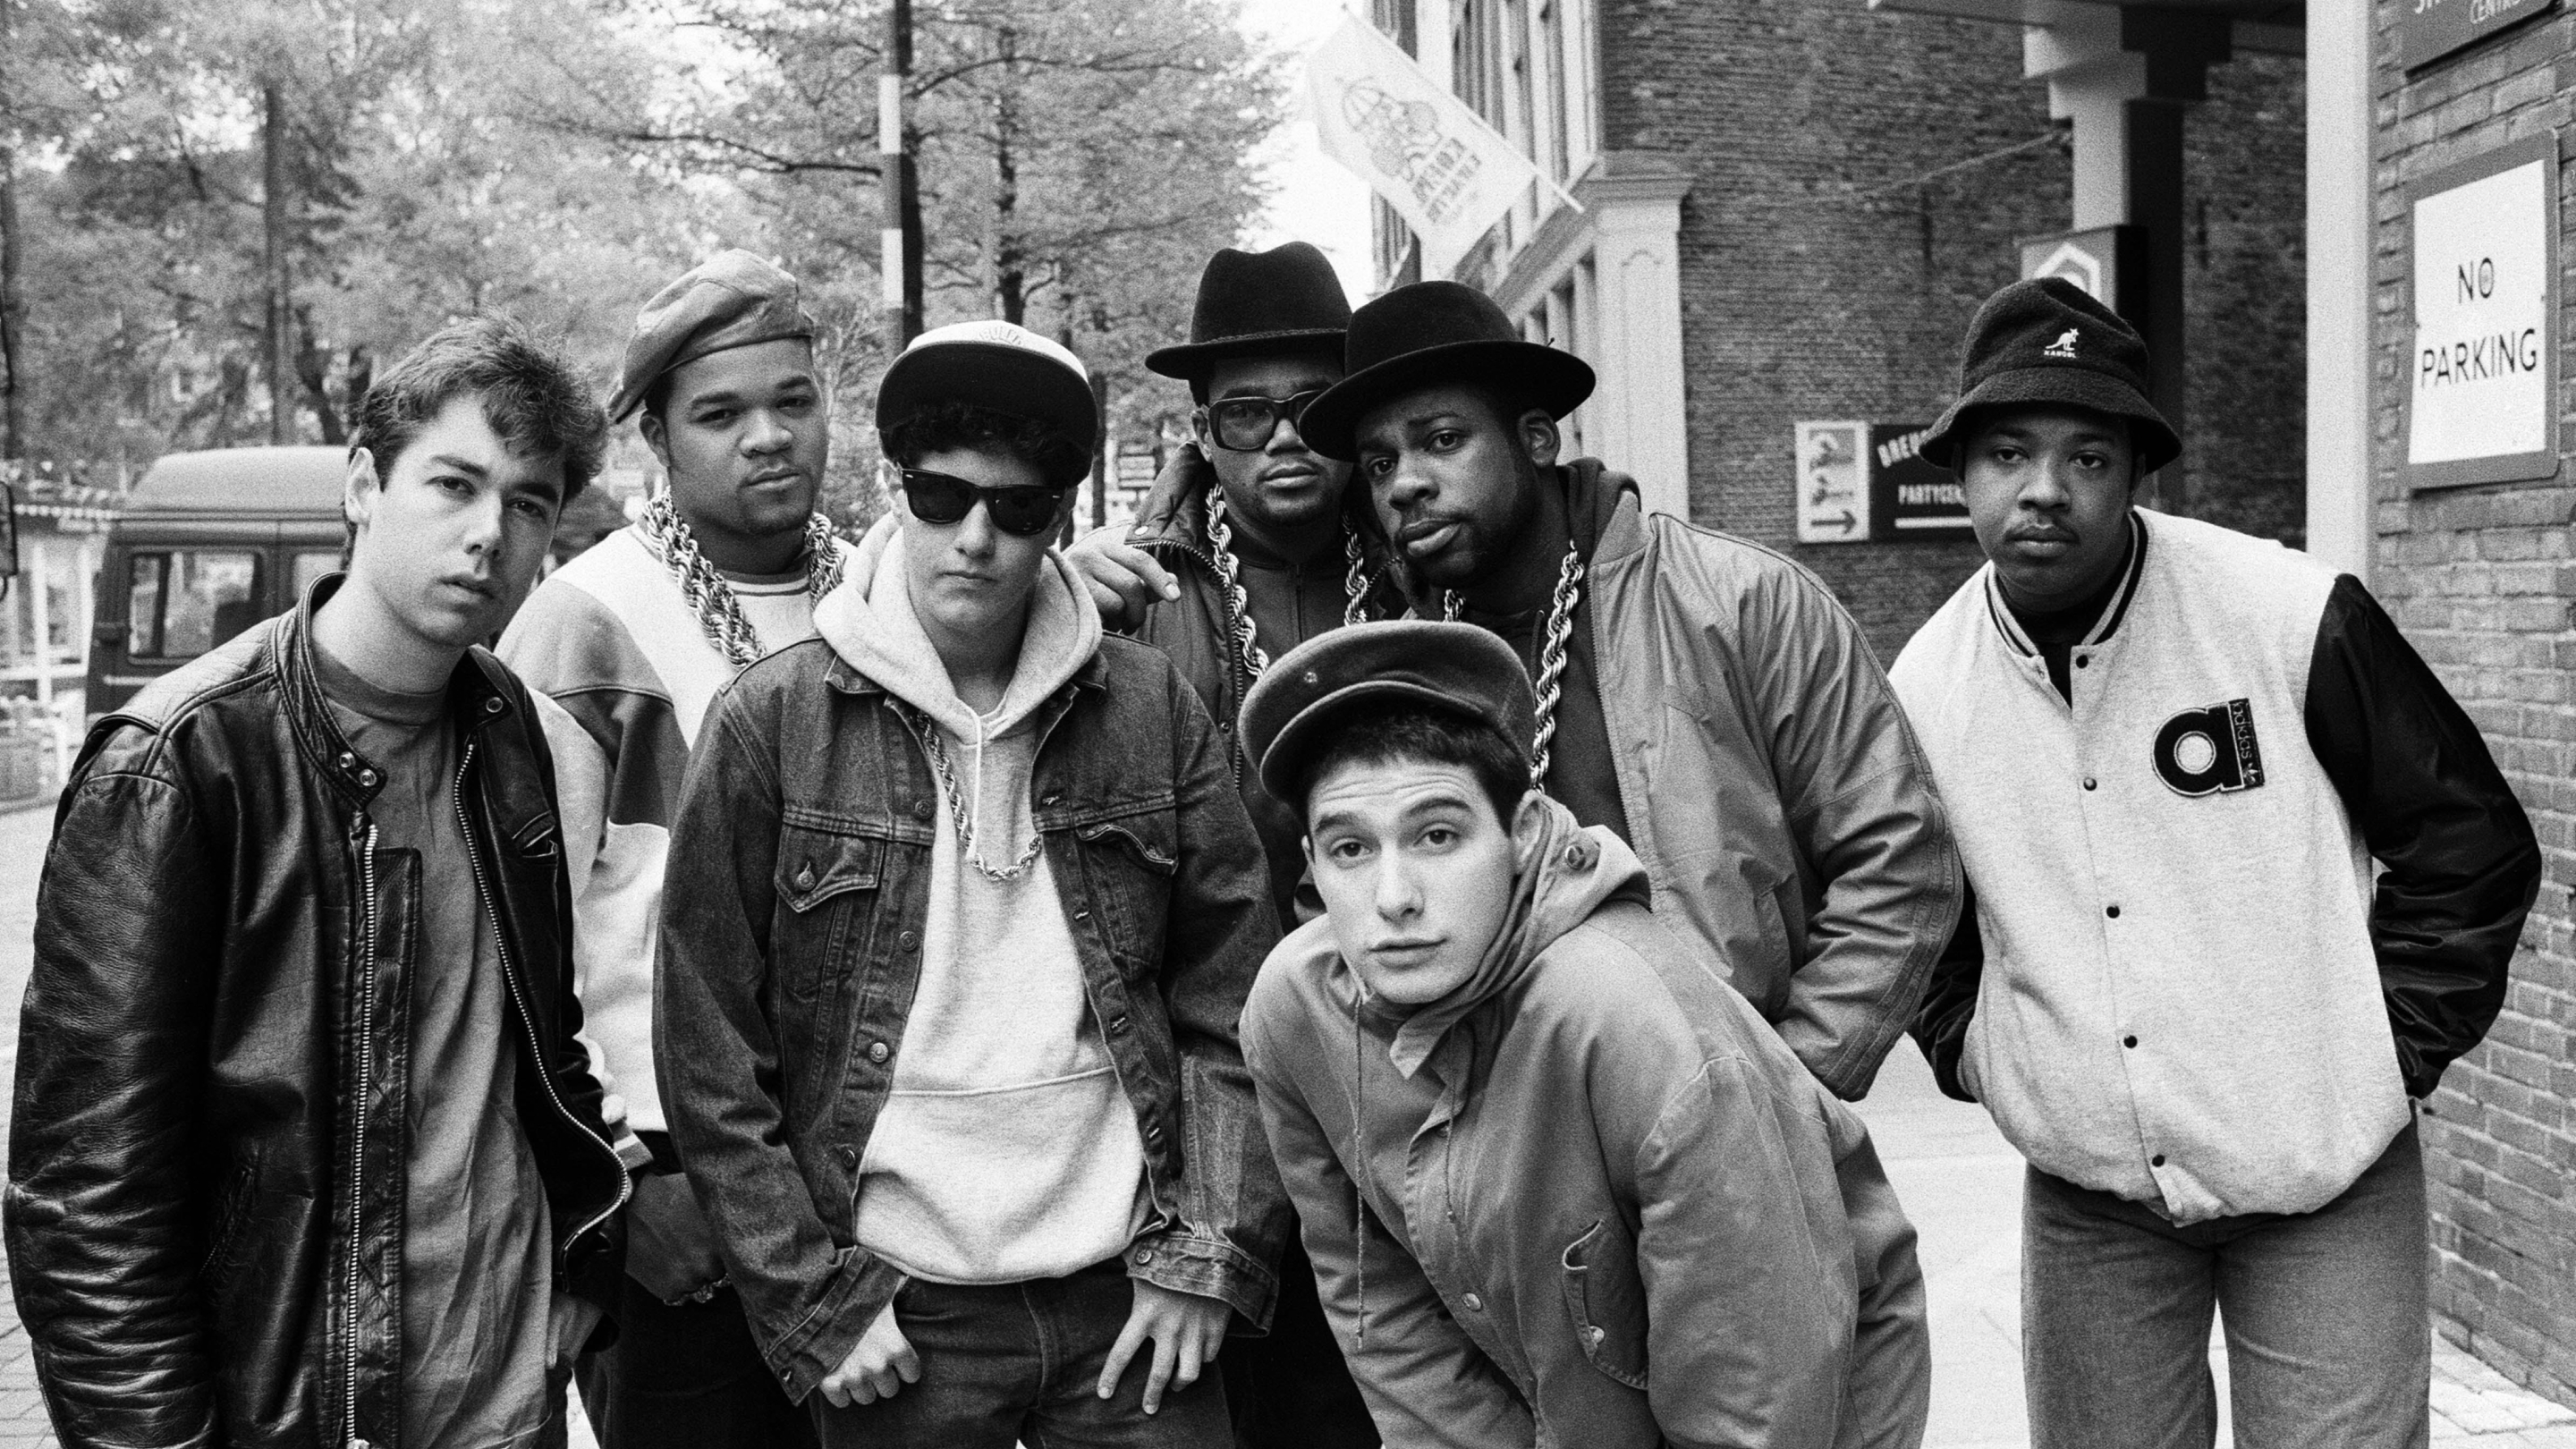 Run DMC and the Beastie Boys grouped together